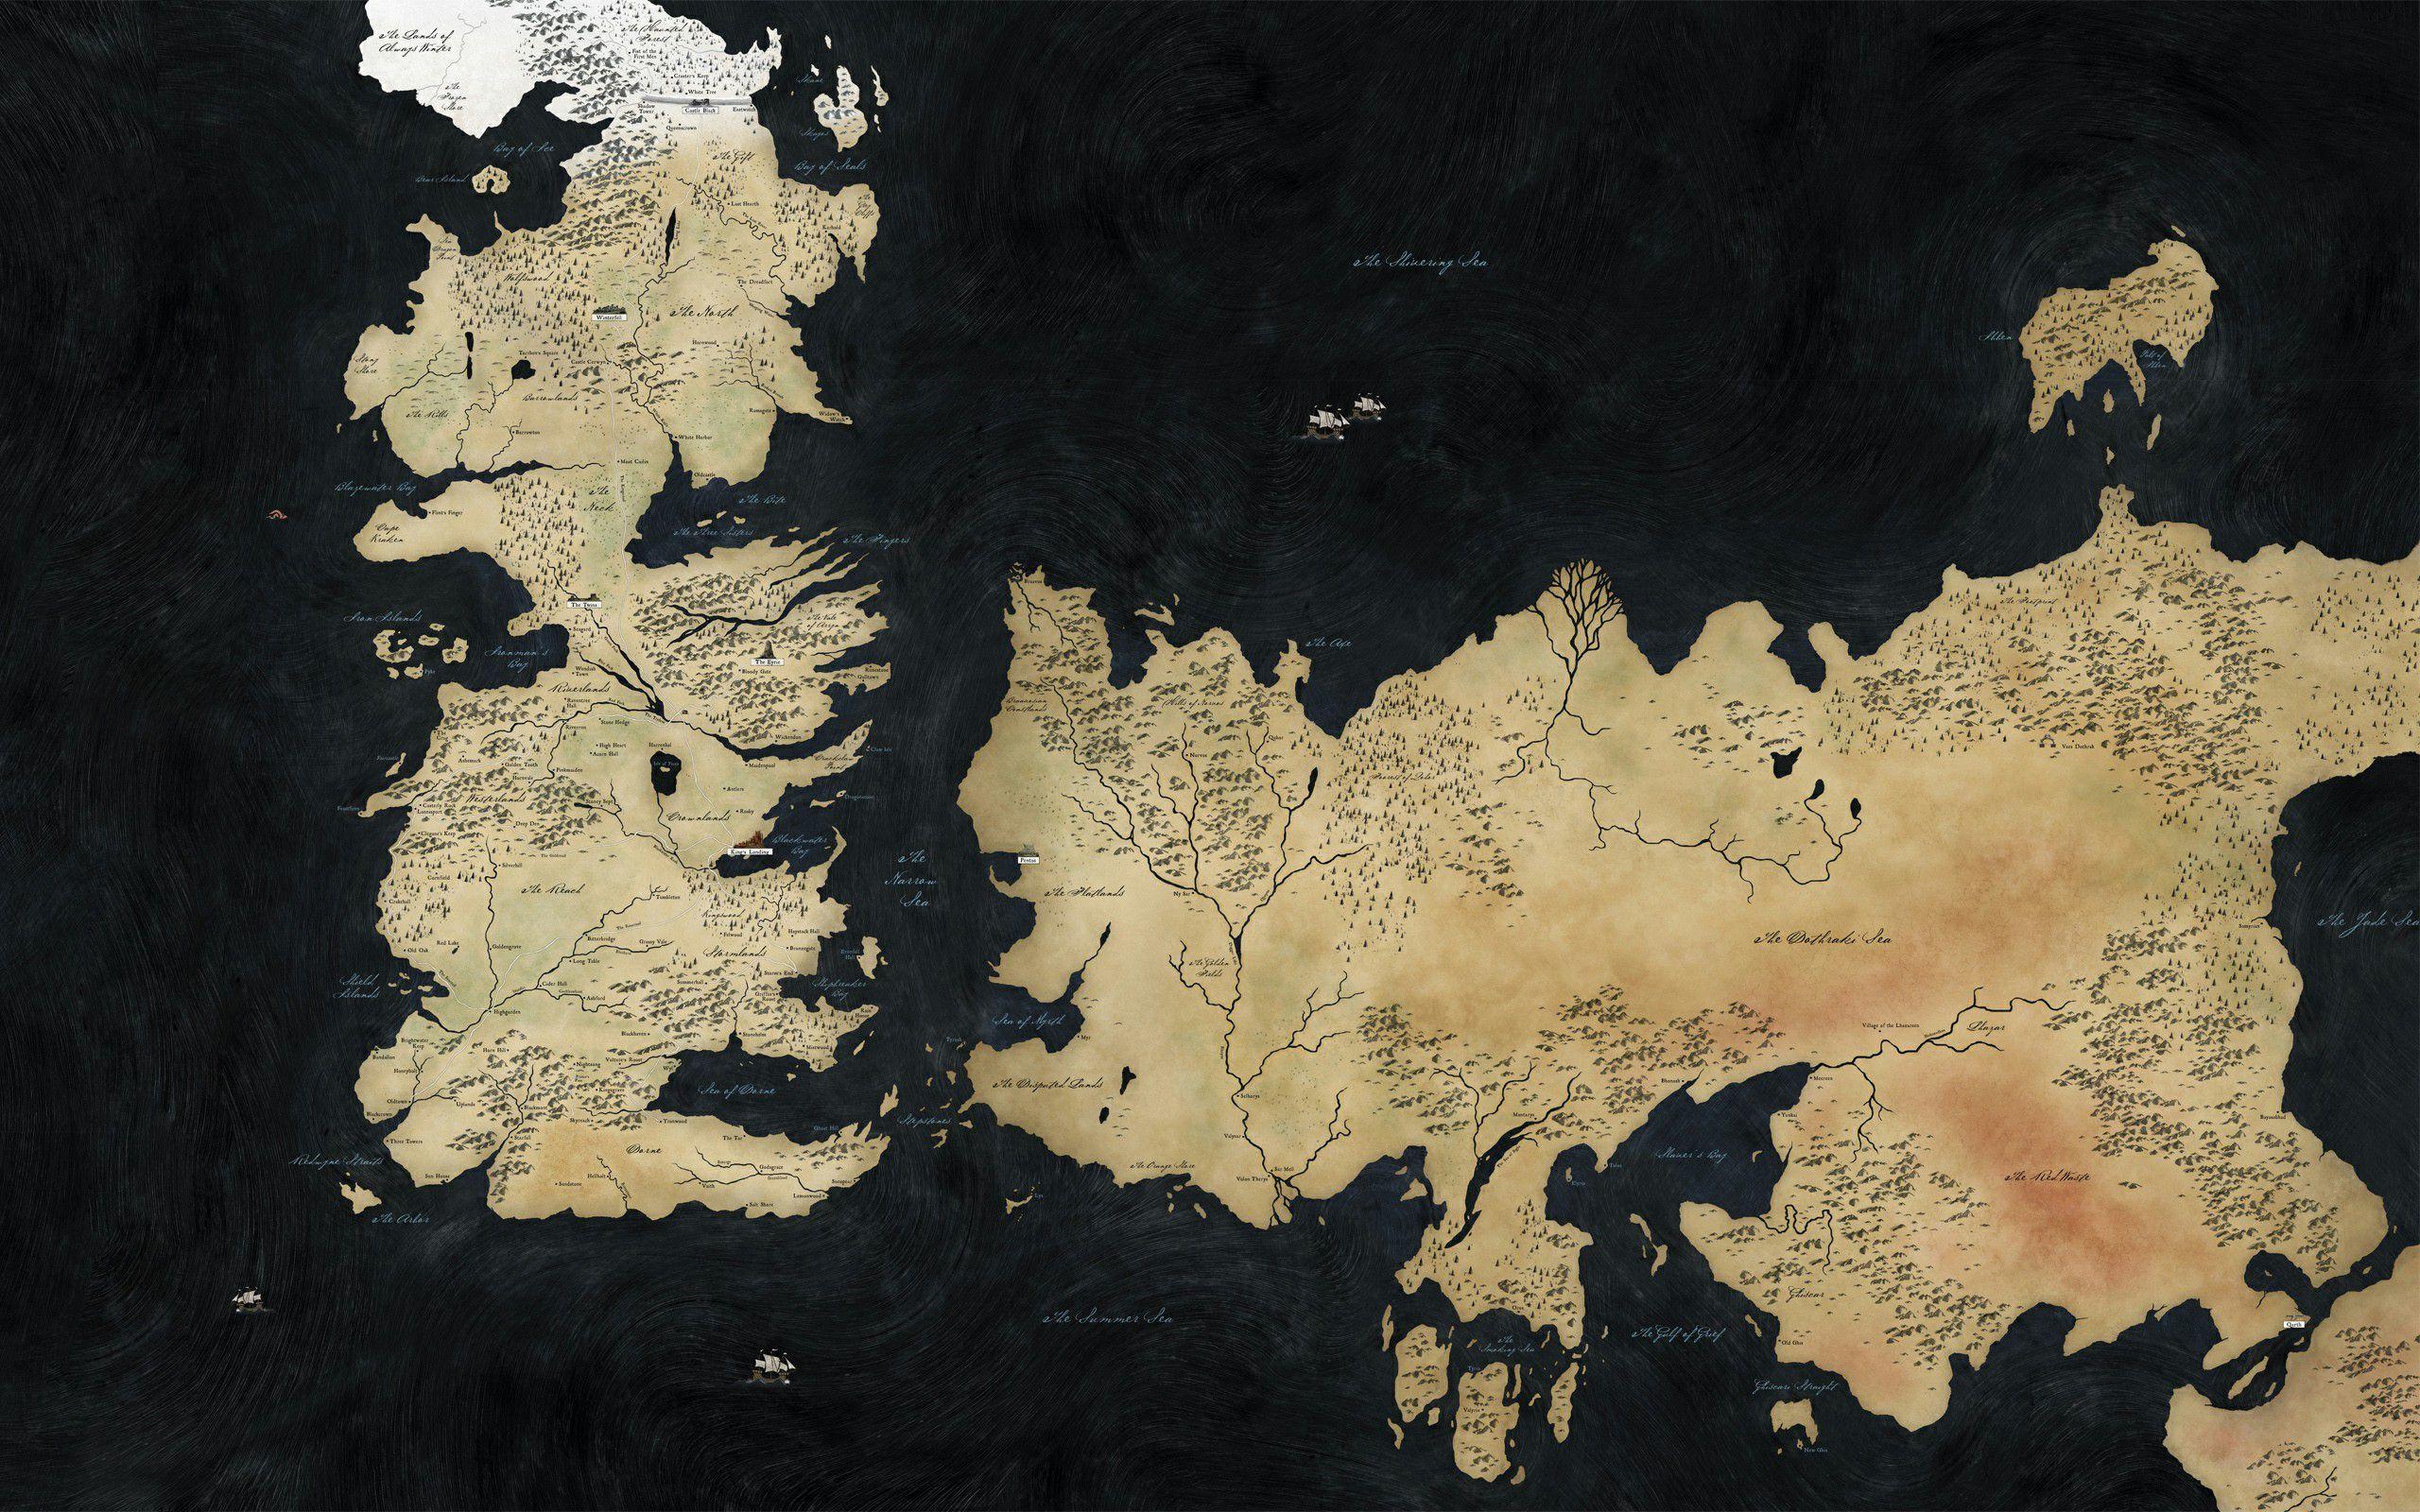 Game of Thrones Map Wallpaper Free Game of Thrones Map